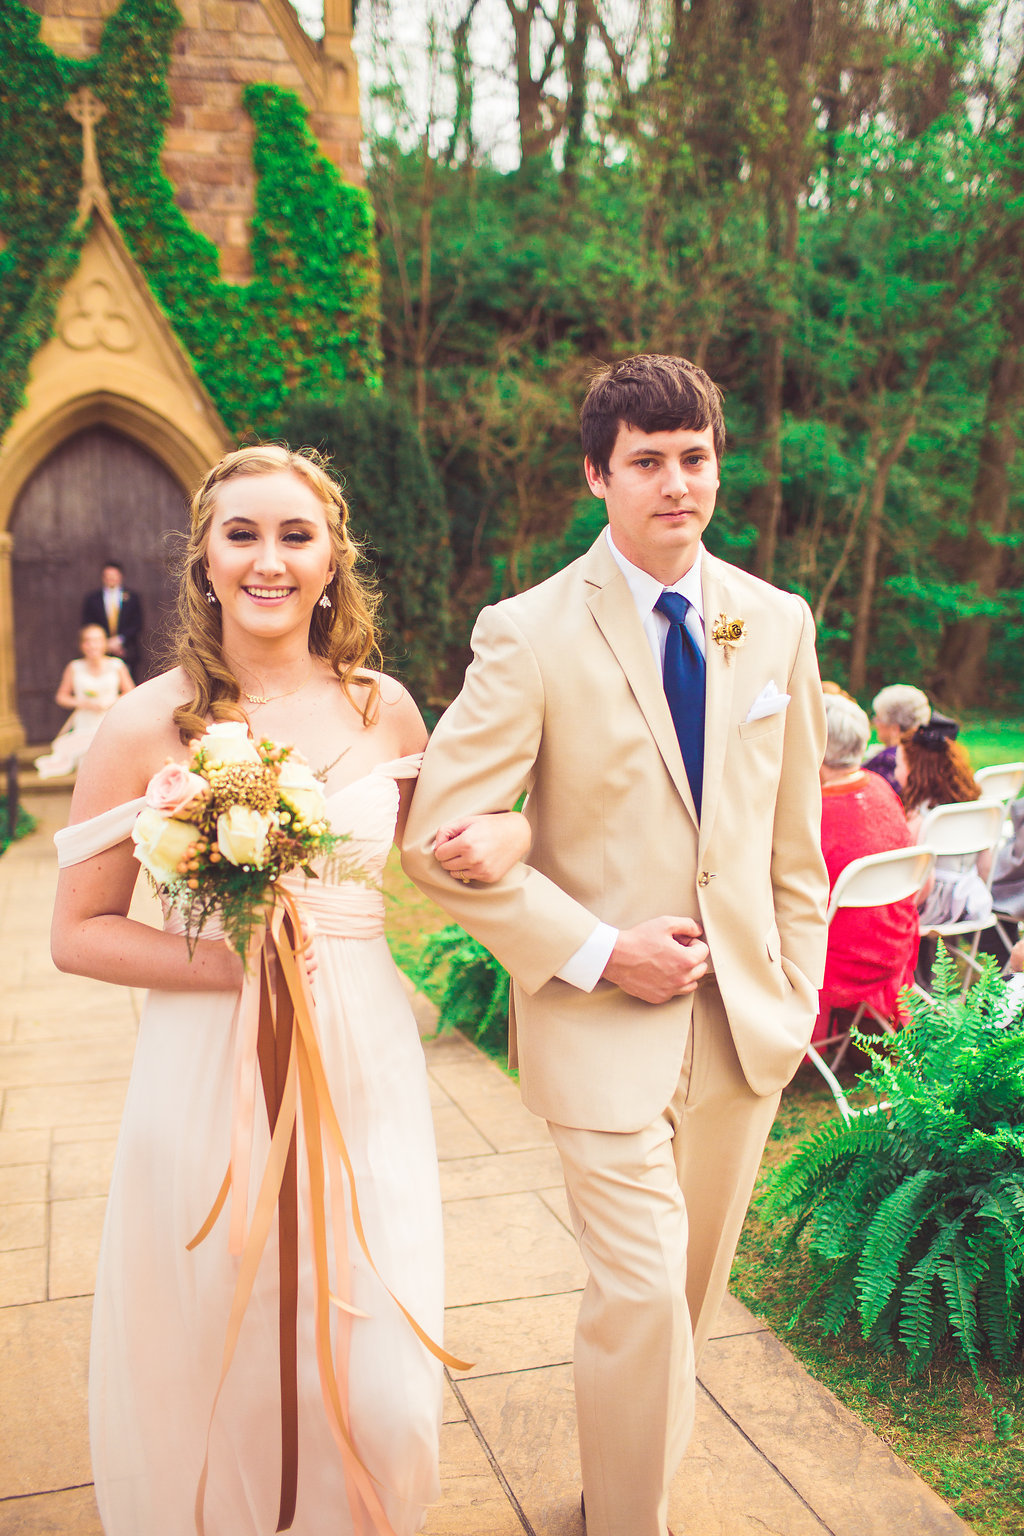 Wedding Photograph Of Bridesmaid in Peach Dress Holding a Bouquet and Groomsman in Light Brown Suit Walking Down The Aisle Los Angeles